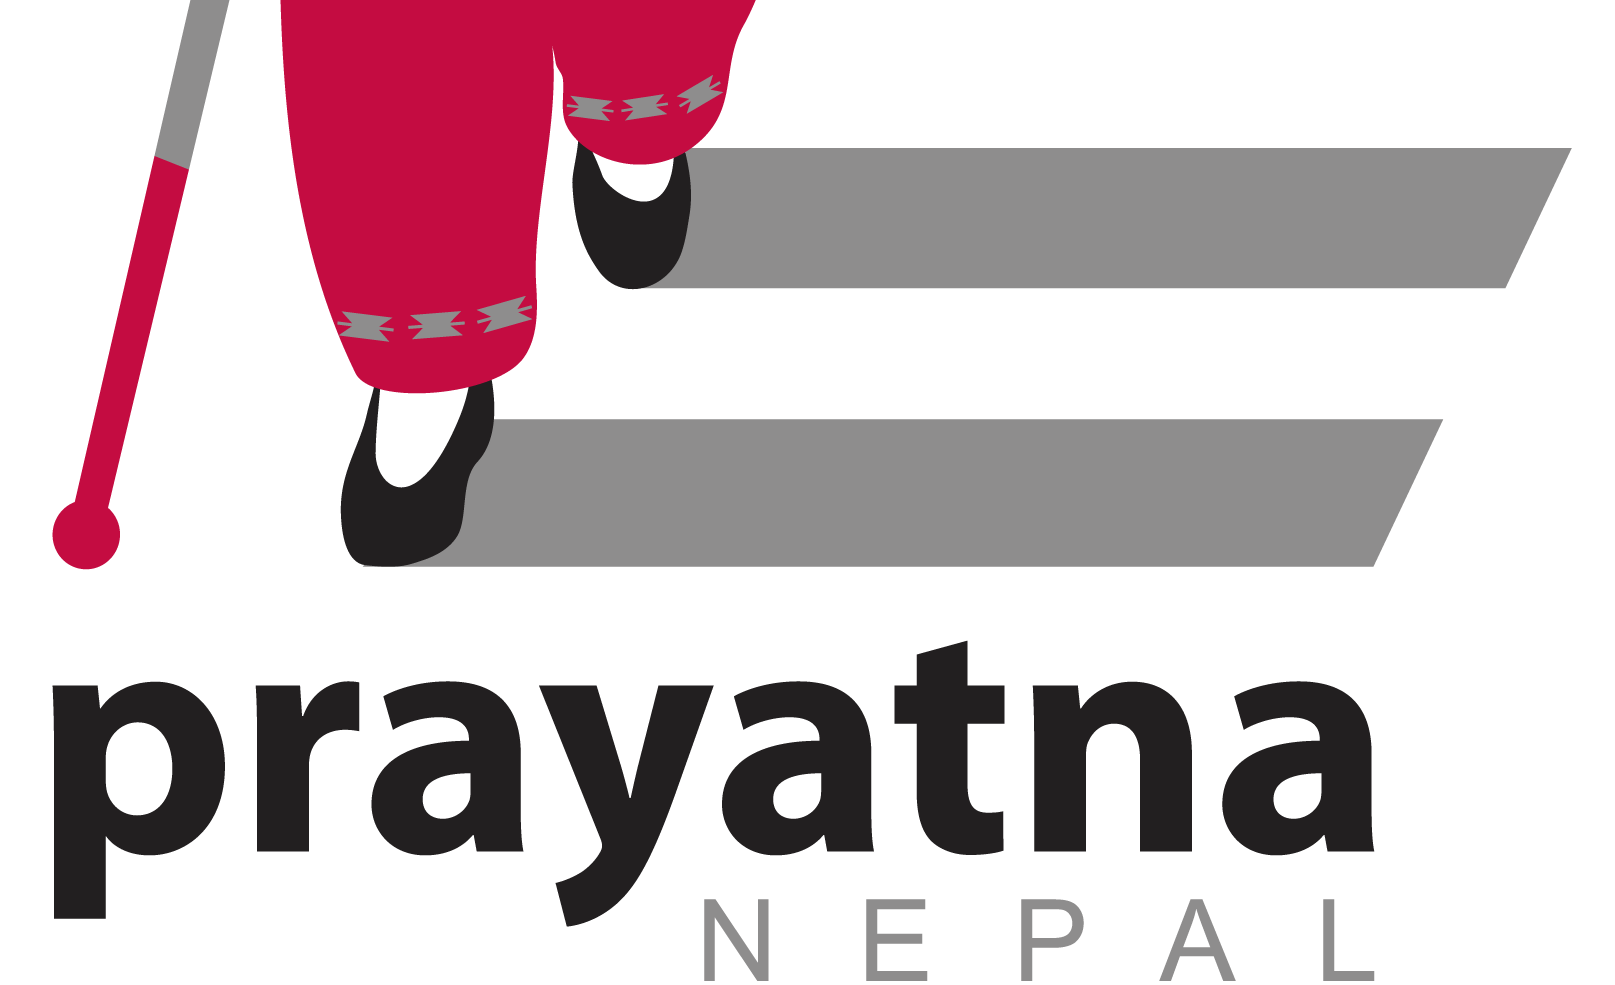 Logo of Prayatna Nepal showing a pair of legs of a women wearing pink pants and black shoes walking on zebra crossing. A tip of white cane with same color is also shown. Bottom part contains name of the organization.